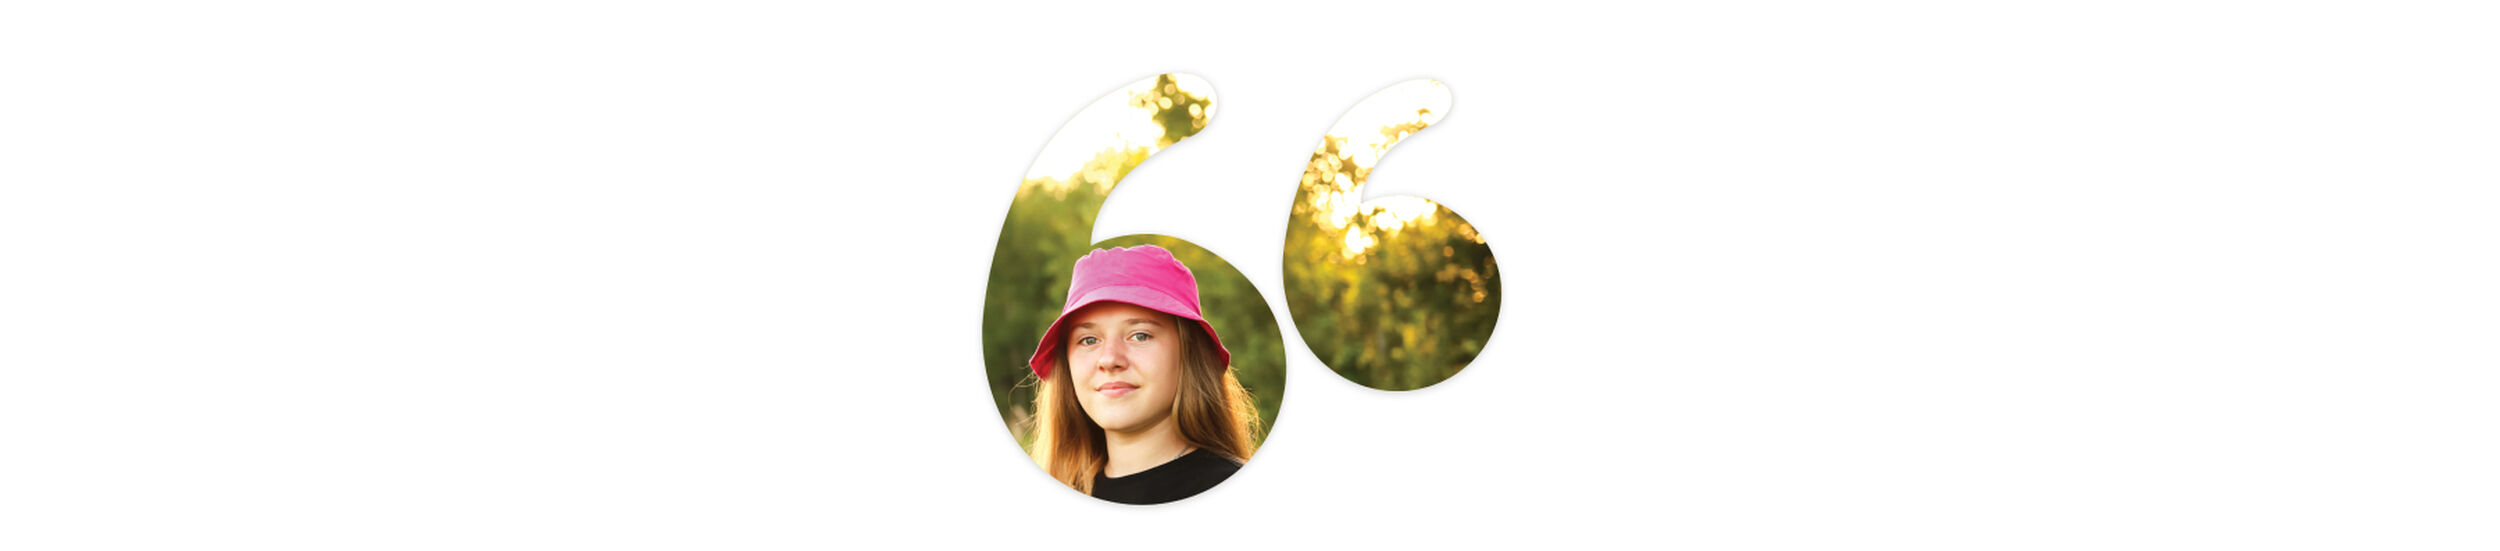 Teenage girl wearing pink hat quotation mark care day FL